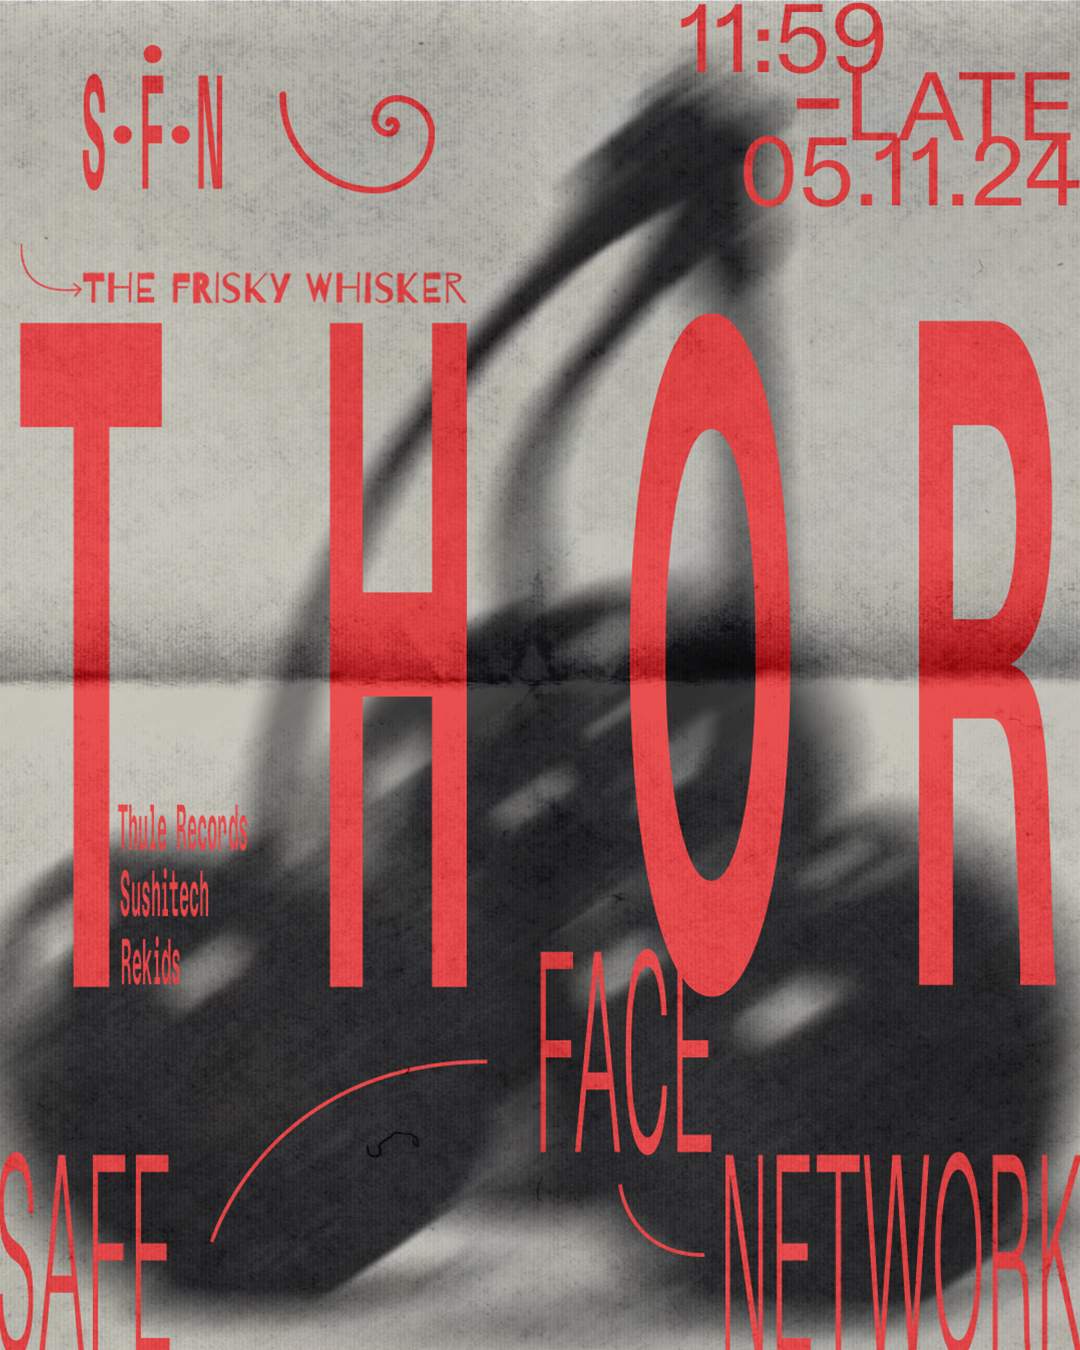 Safe Face Network presents: Thor - フライヤー表